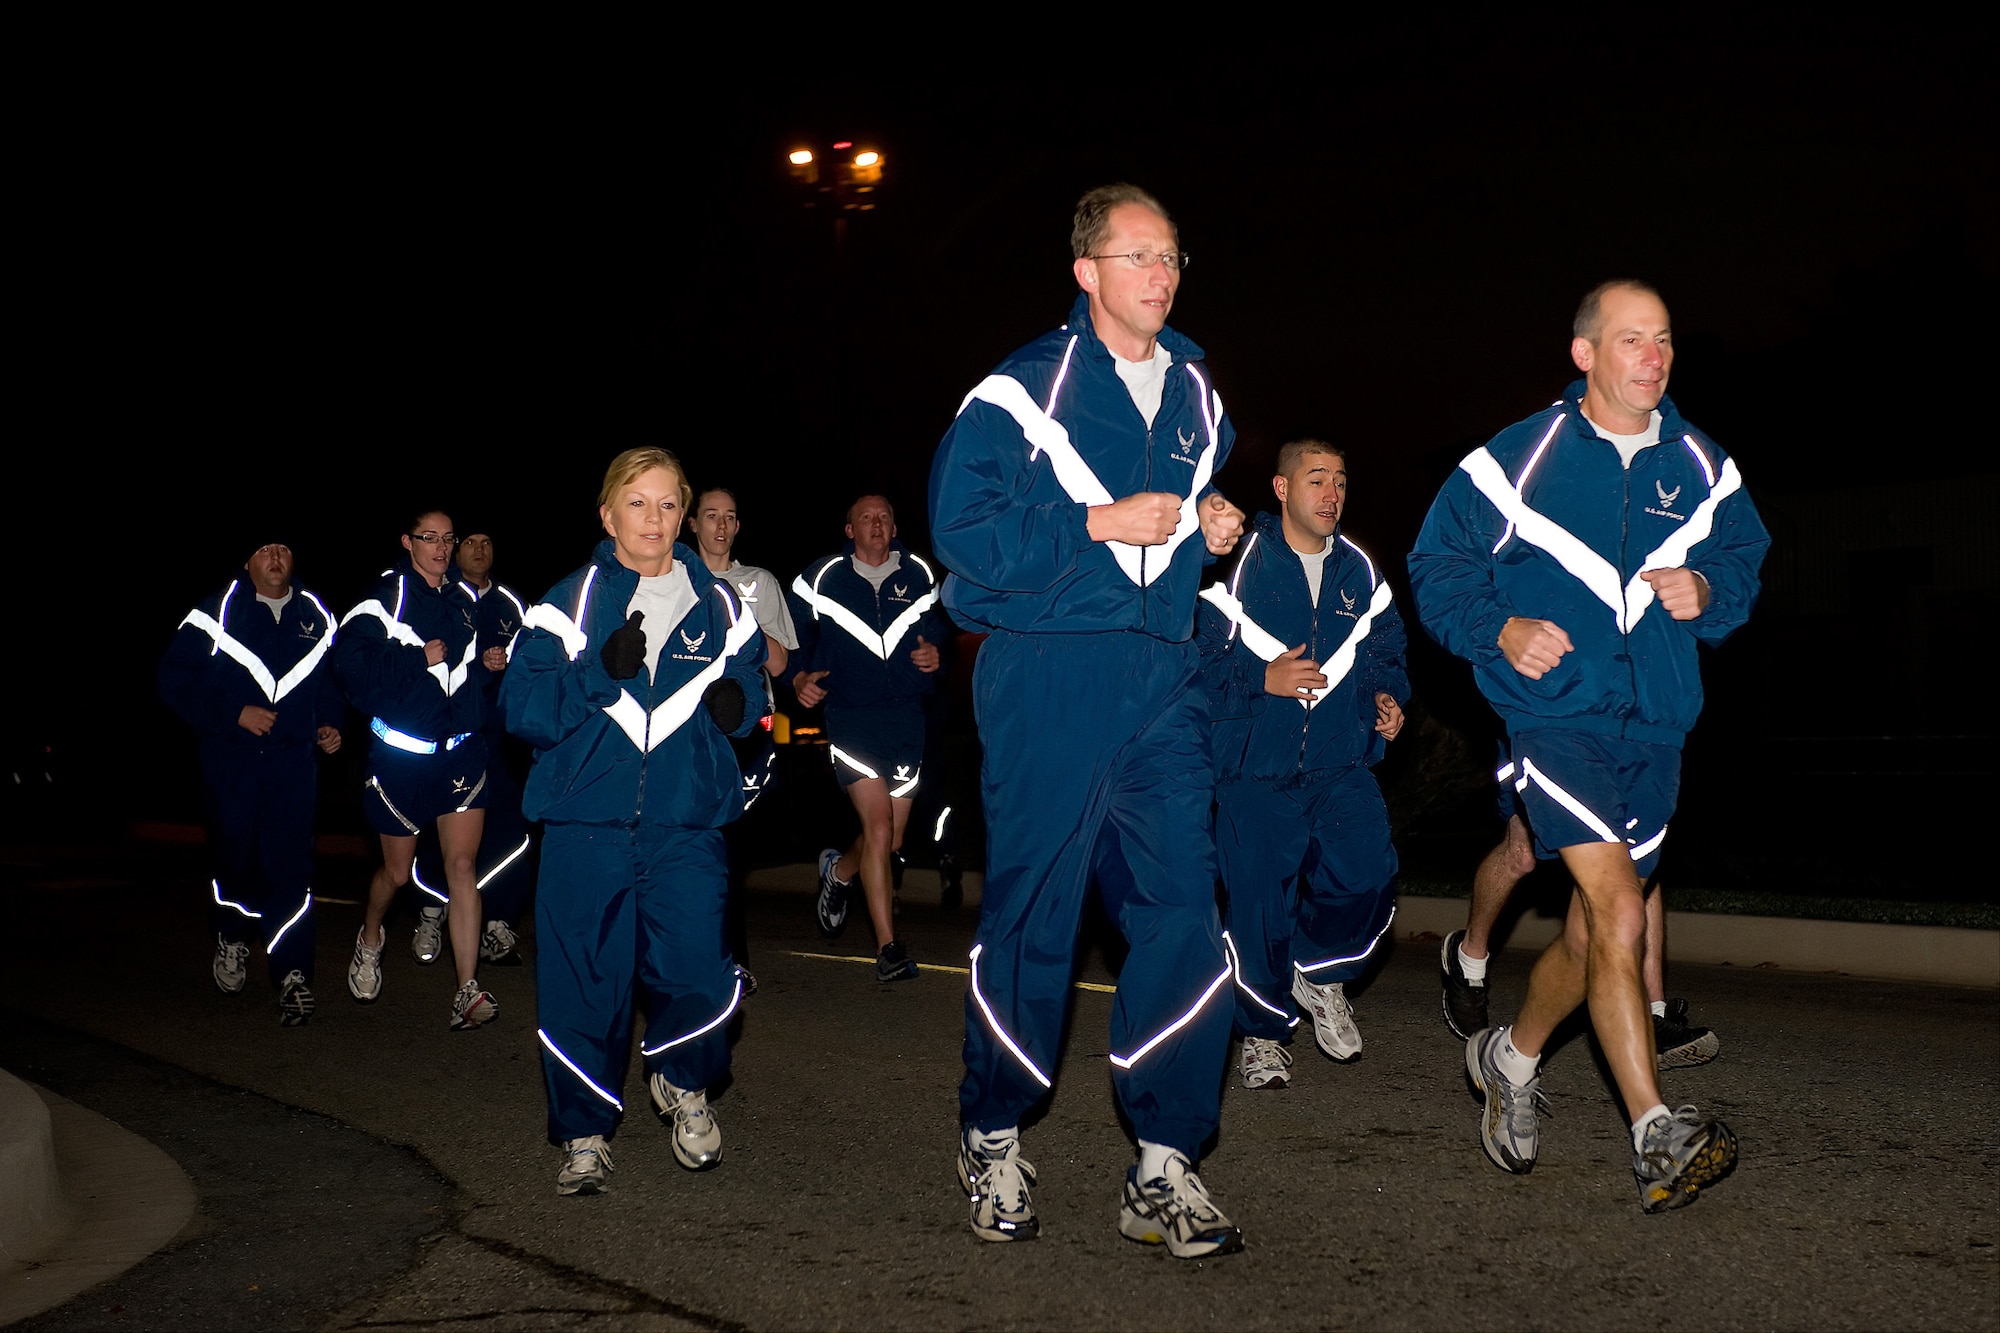 Maj. Gen. James T. Rubeor, 22nd Air Force commander, runs with 512th Airlift Wing reservists Nov. 8. The general visited Dover Air Force Base, Del., Nov. 5-8. The 512th AW is a subordinate of 22nd AF. As the commander of 22 AF, General Rubeor, manages 15 AF Reserve wings located in 14 states with more than 25,000 reservists and 149 unit-equipped aircraft. (U.S. Air Force photo/Roland Balik)